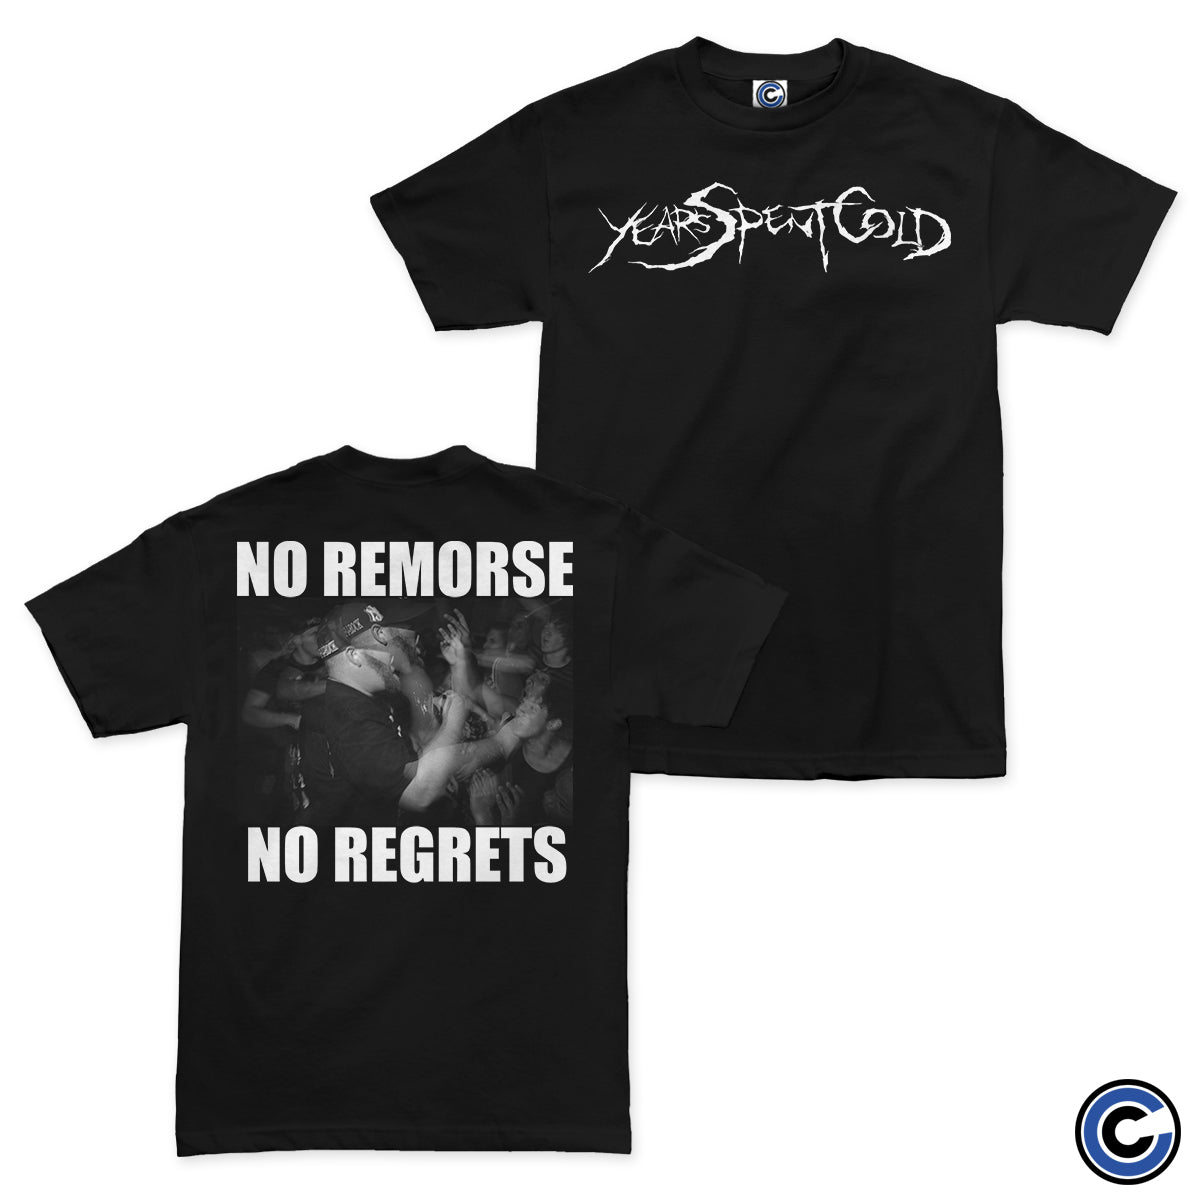 Years Spent Cold "No Remorse" Shirt